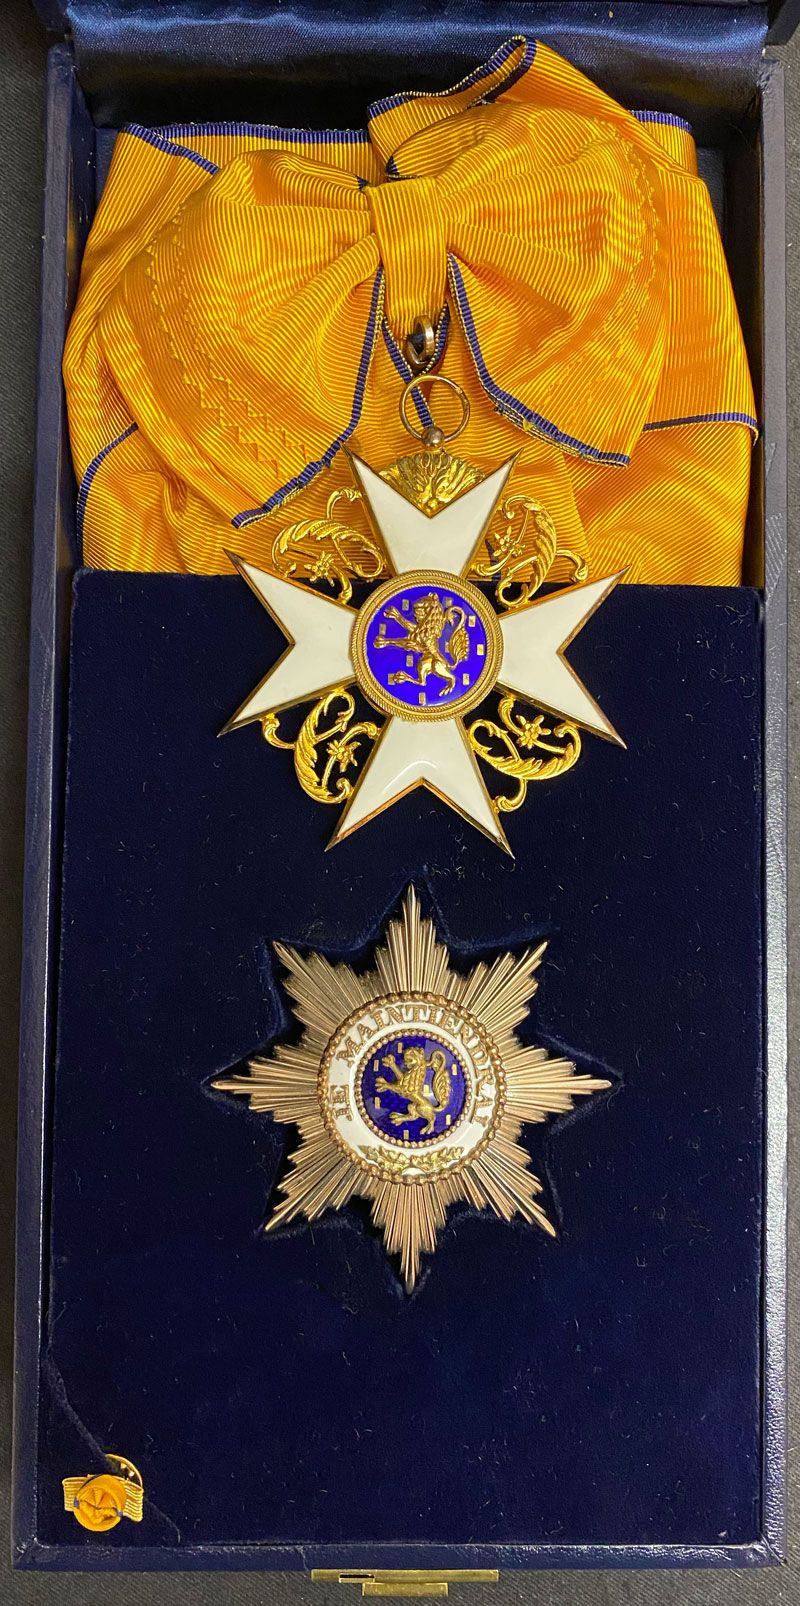 Null Luxembourg - Order of the Golden Lion of the House of Nassau, founded in 18&hellip;